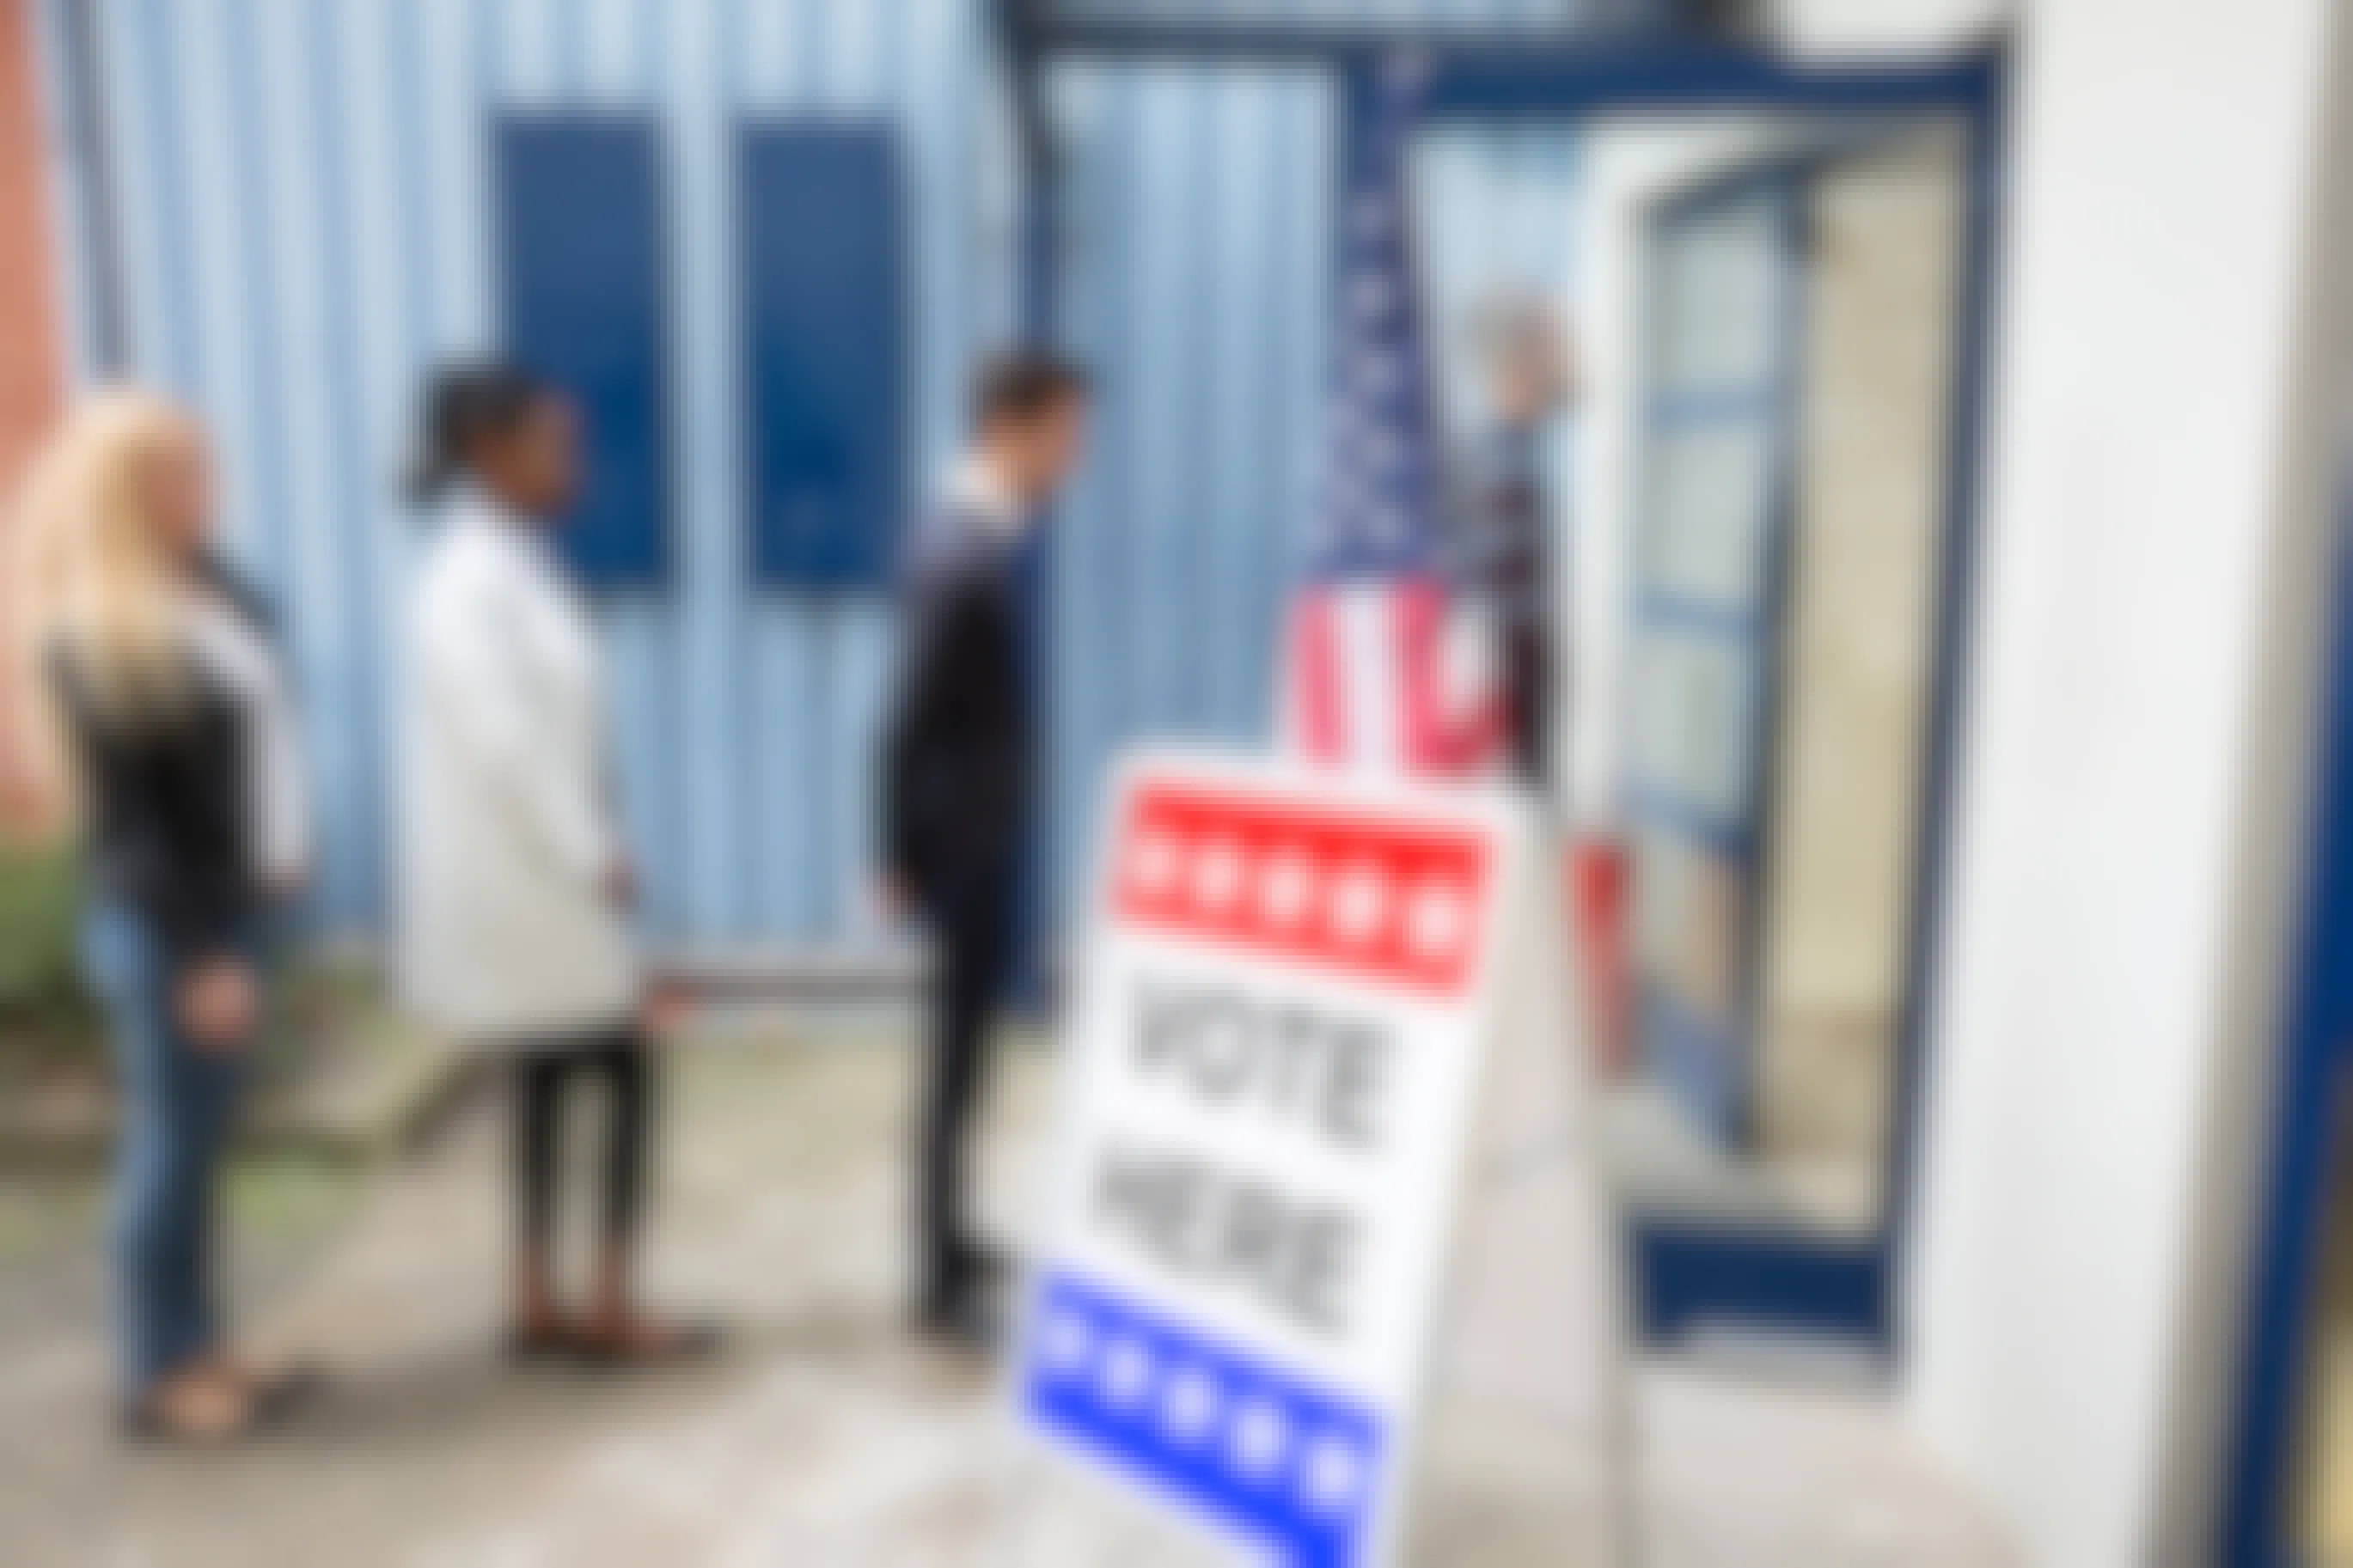 28 Stores That Are Making Election Day 2020 a Holiday